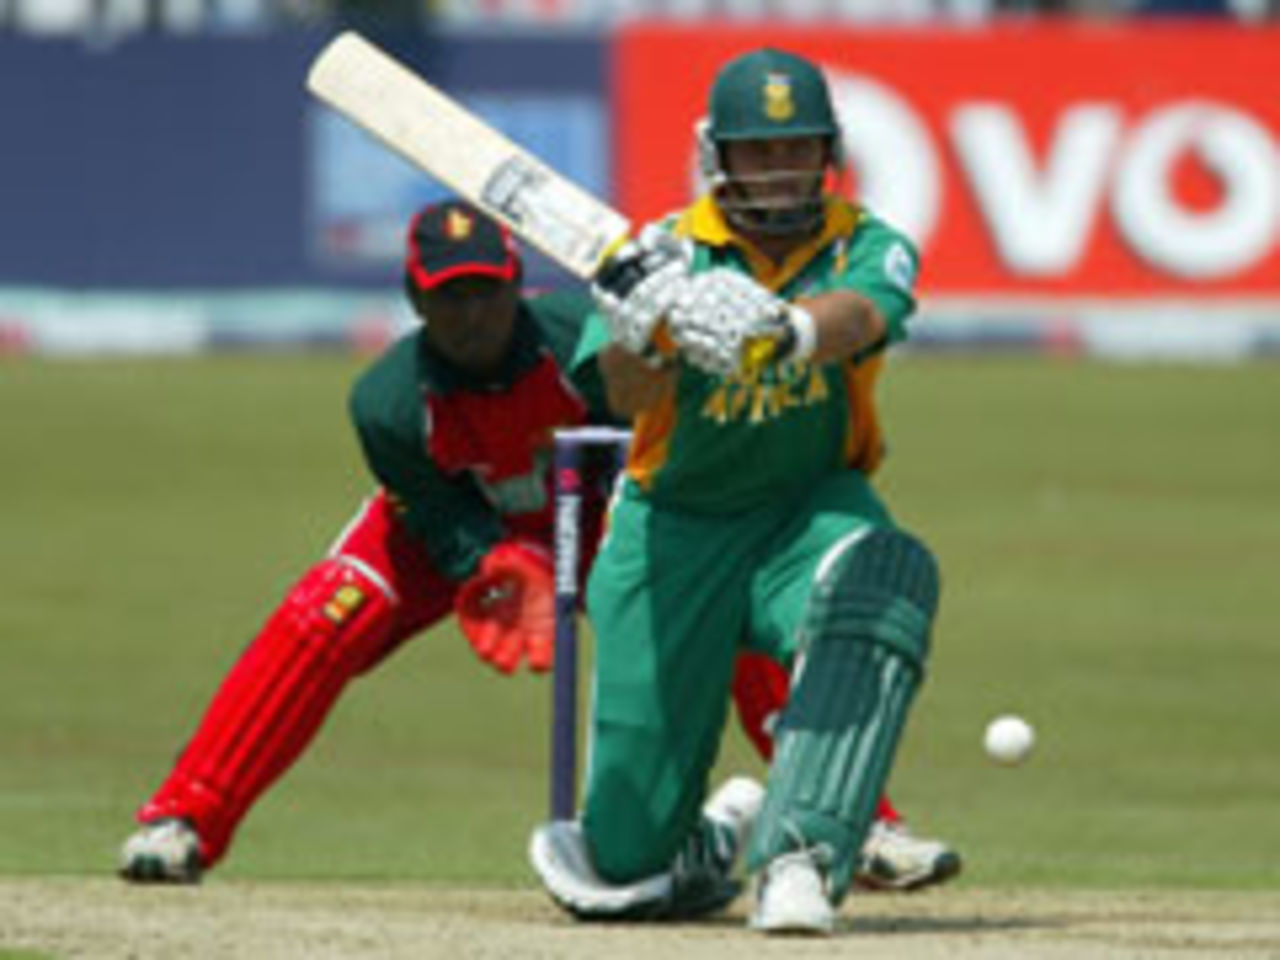 Jacques Kallis: scored a career-best 125 not out against Zimbabwe at Canterbury